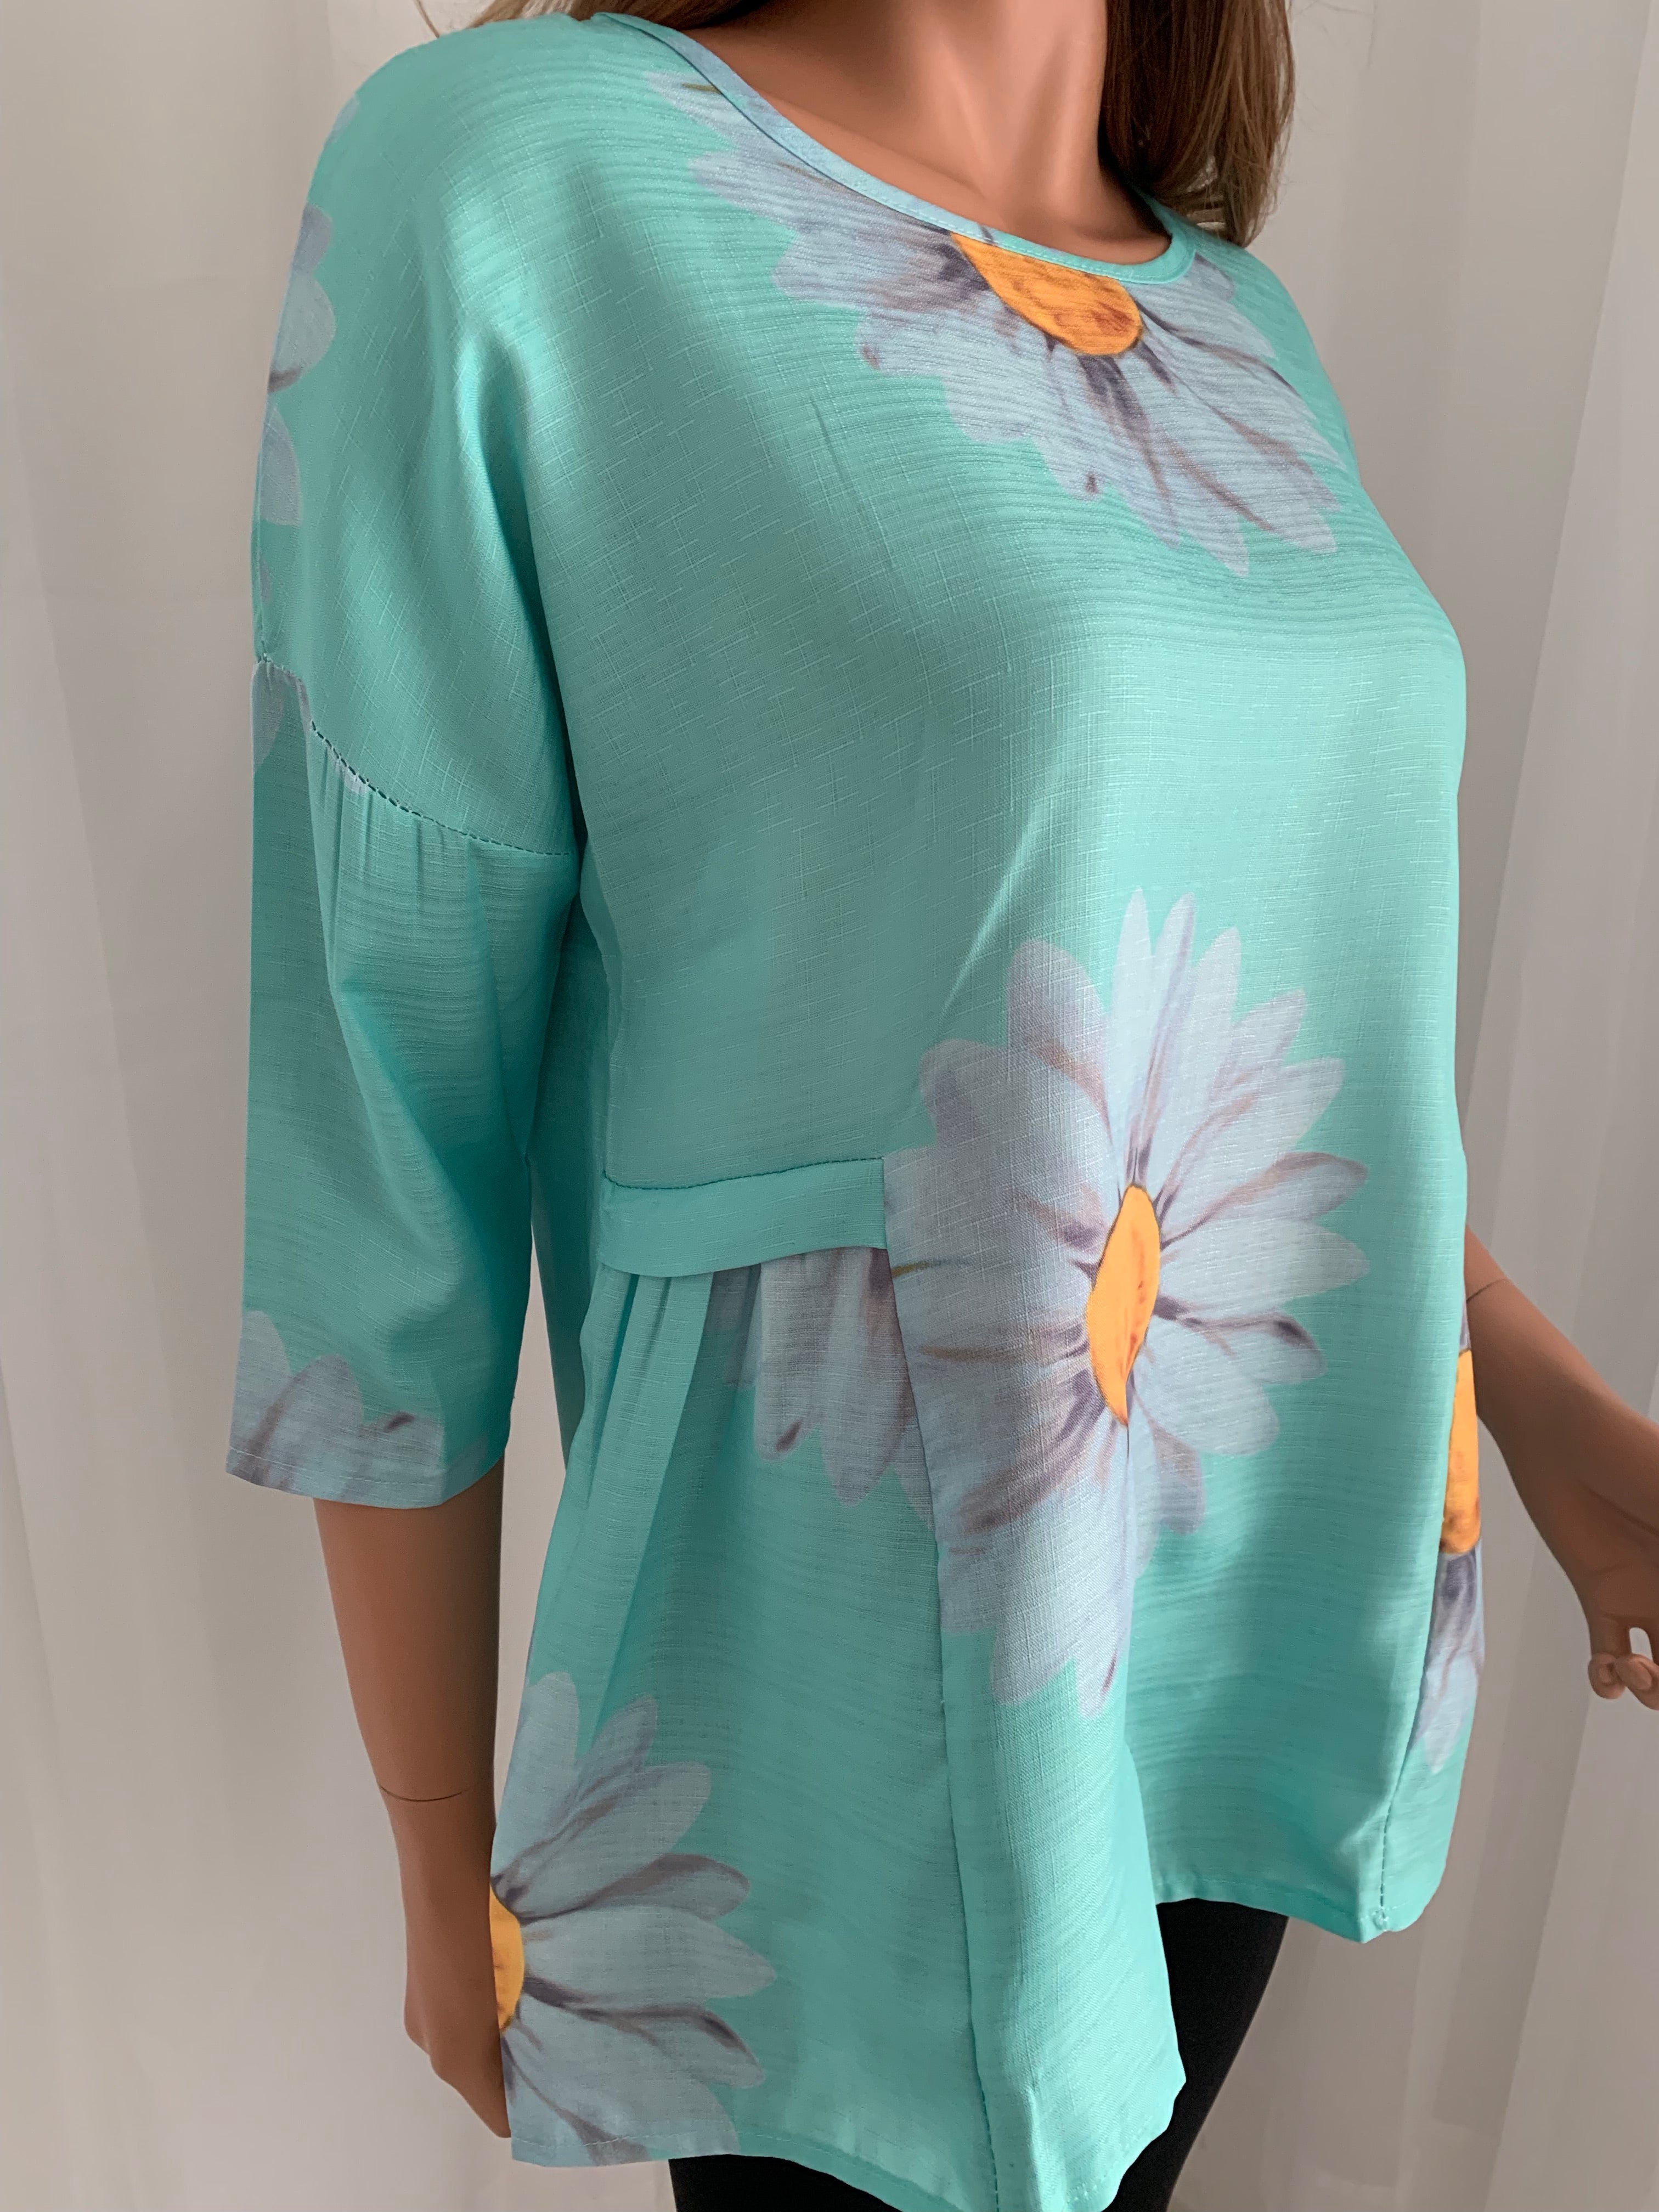 Relaxed fit cotton blend top with 3/4 sleeve. Pretty sea green color and trending daisy design makes this top wearable for any occasion.  Note: No stretch so they fit on the smaller end of size guide. This is a nice quality top! 